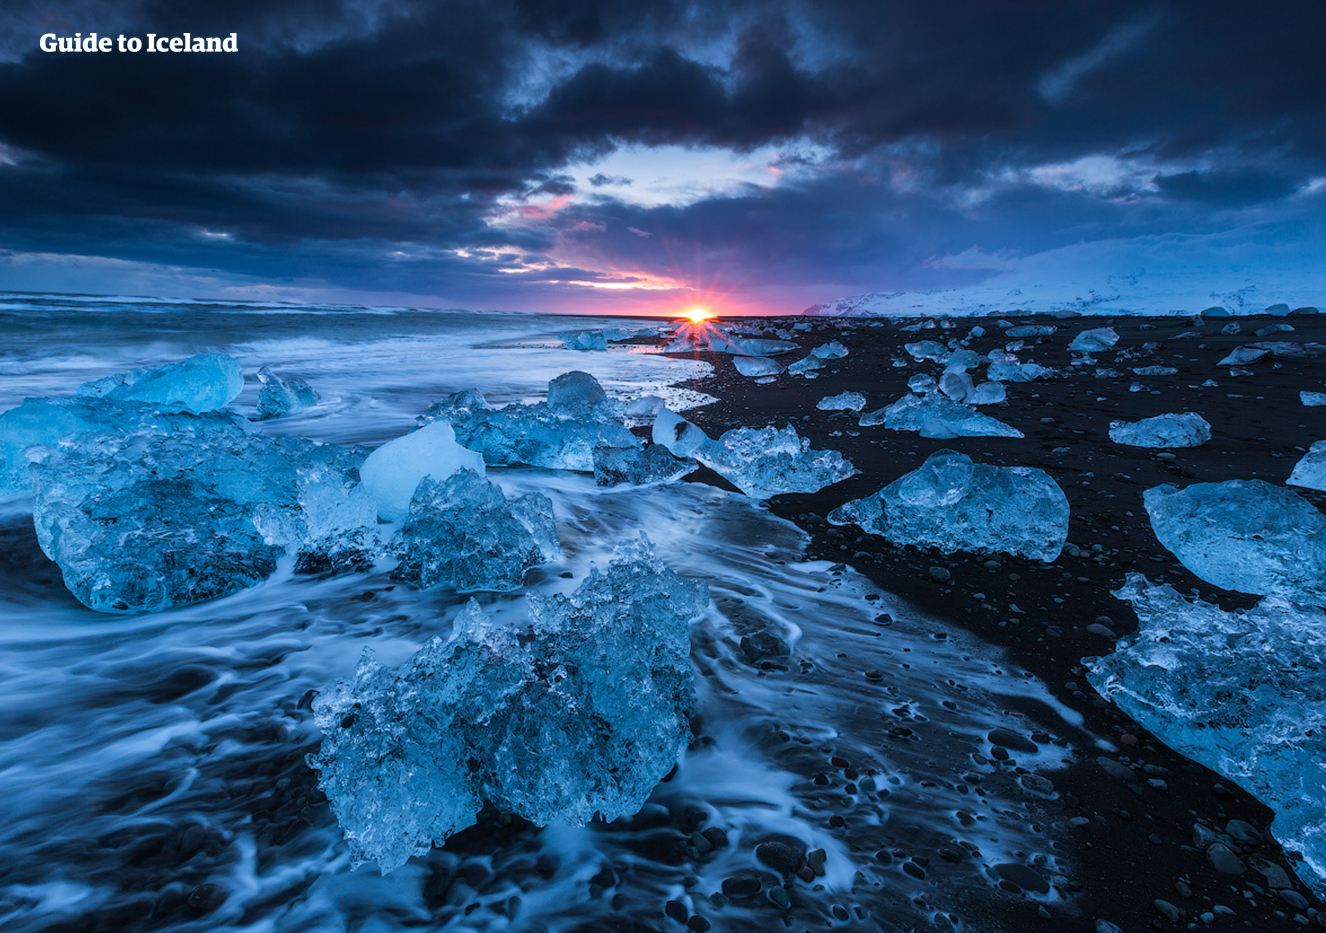 On a winter self-drive tour, you can visit the Diamond Beach in the evening and watch as the sun sets among glistening icebergs.